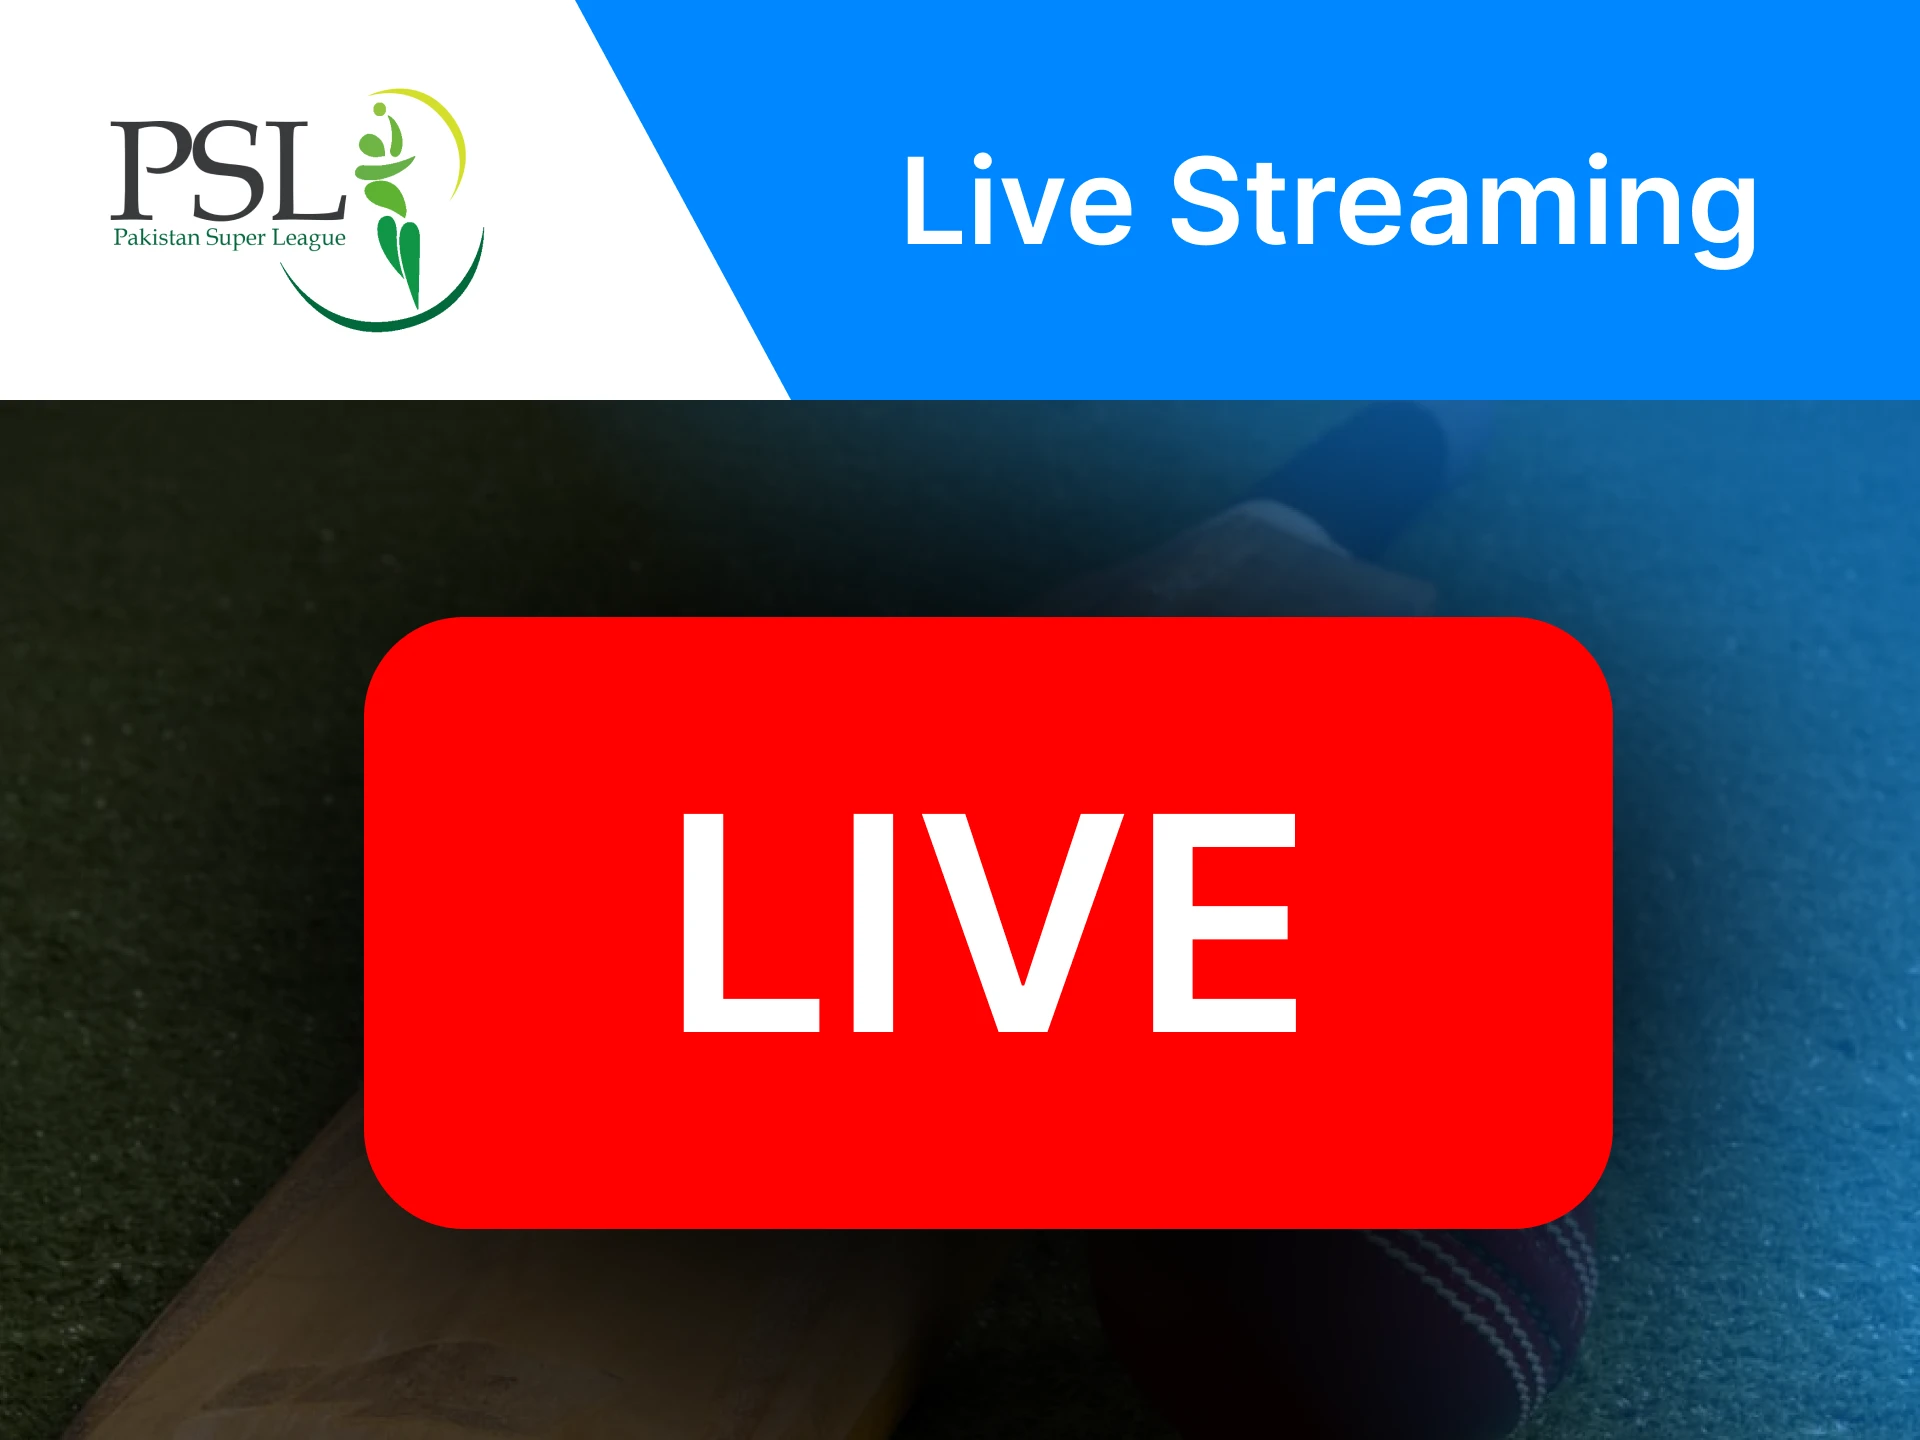 You can follow matches of PSL online thanks to live streaming.